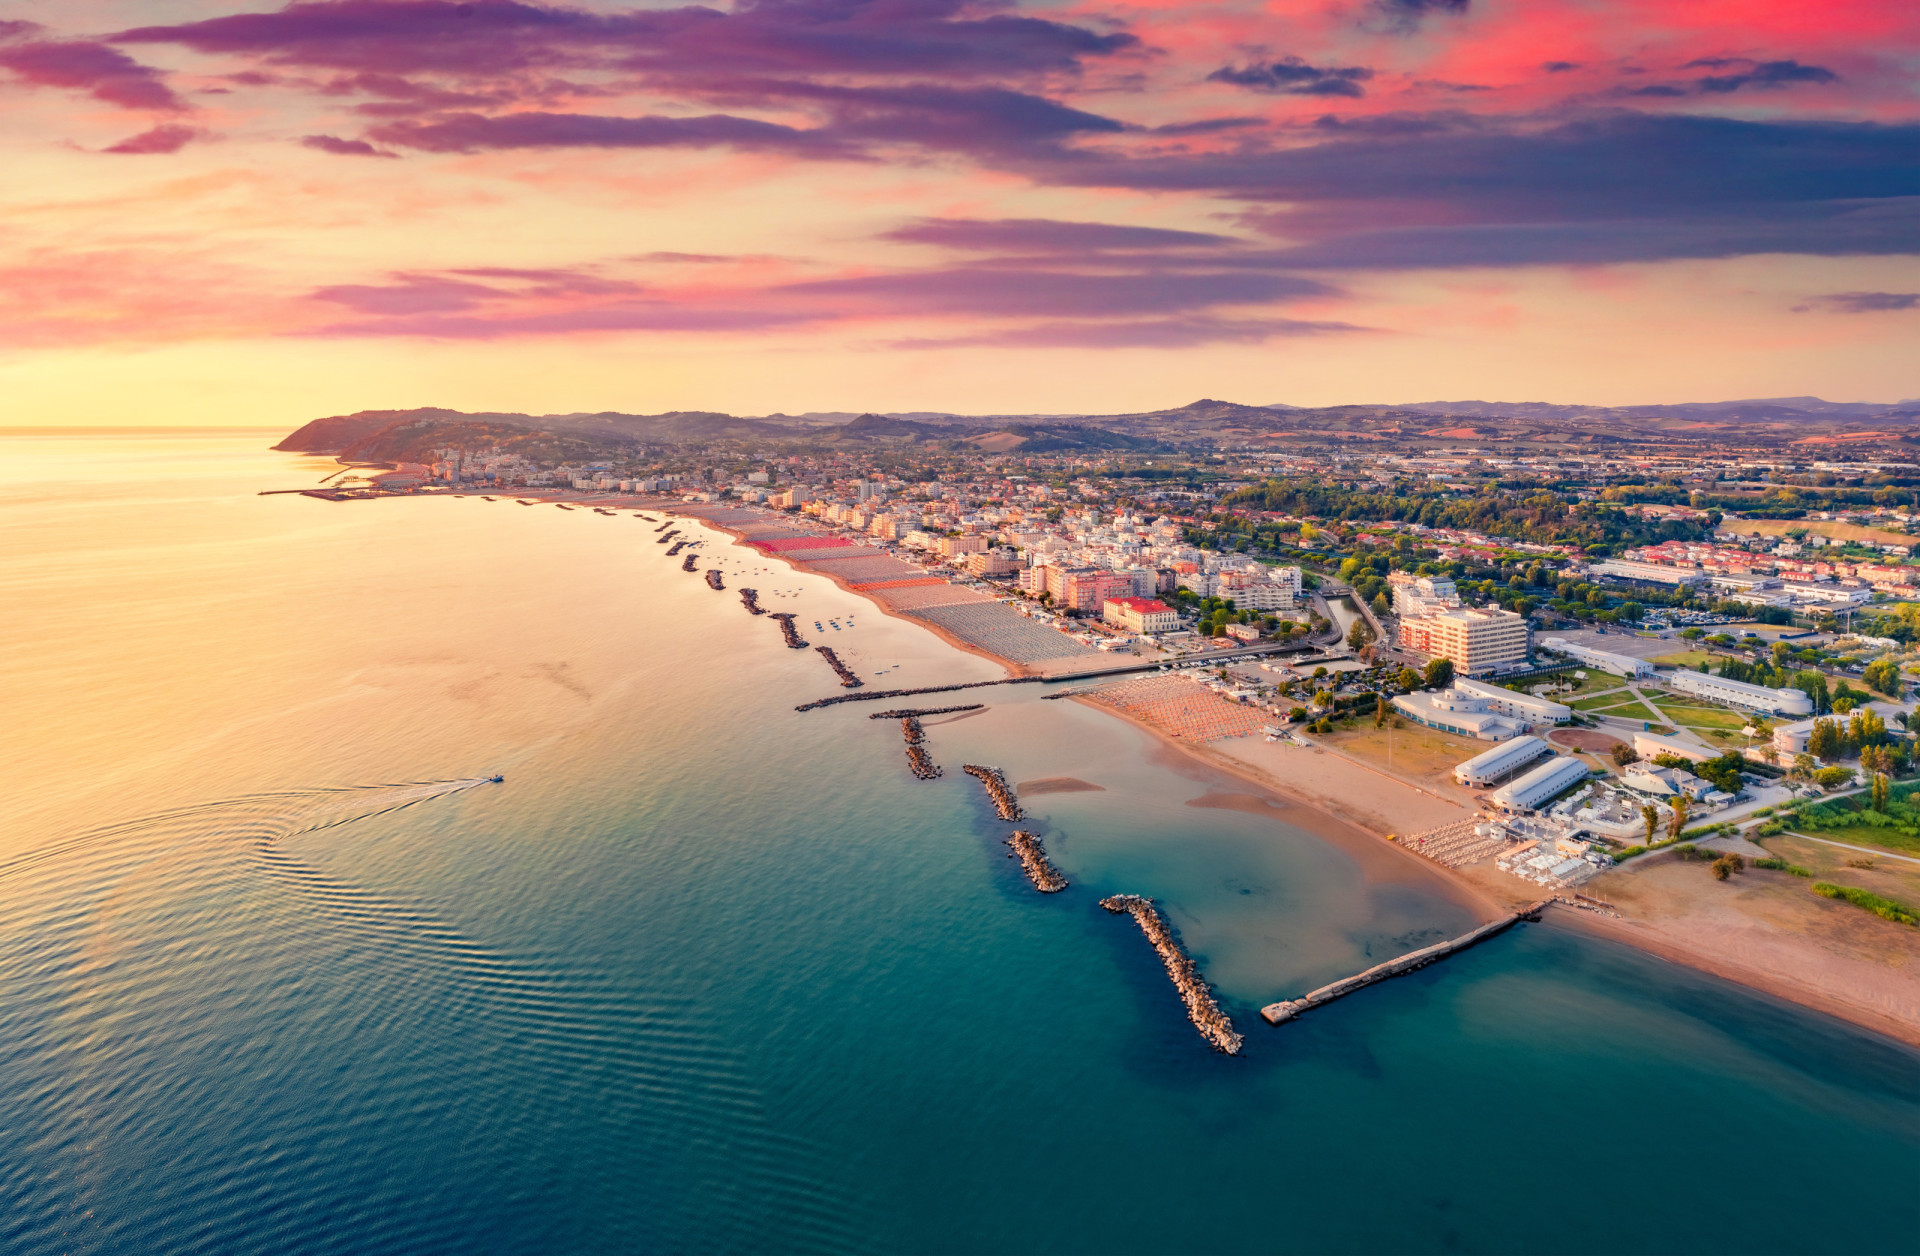 <p>Another flight lasting 40 minutes will take you to Rimini, a city in the east of Italy that overlooks the gorgeous Adriatic Sea.</p><p><a href="https://www.msn.com/en-us/community/channel/vid-7xx8mnucu55yw63we9va2gwr7uihbxwc68fxqp25x6tg4ftibpra?cvid=94631541bc0f4f89bfd59158d696ad7e">Follow us and access great exclusive content every day</a></p>